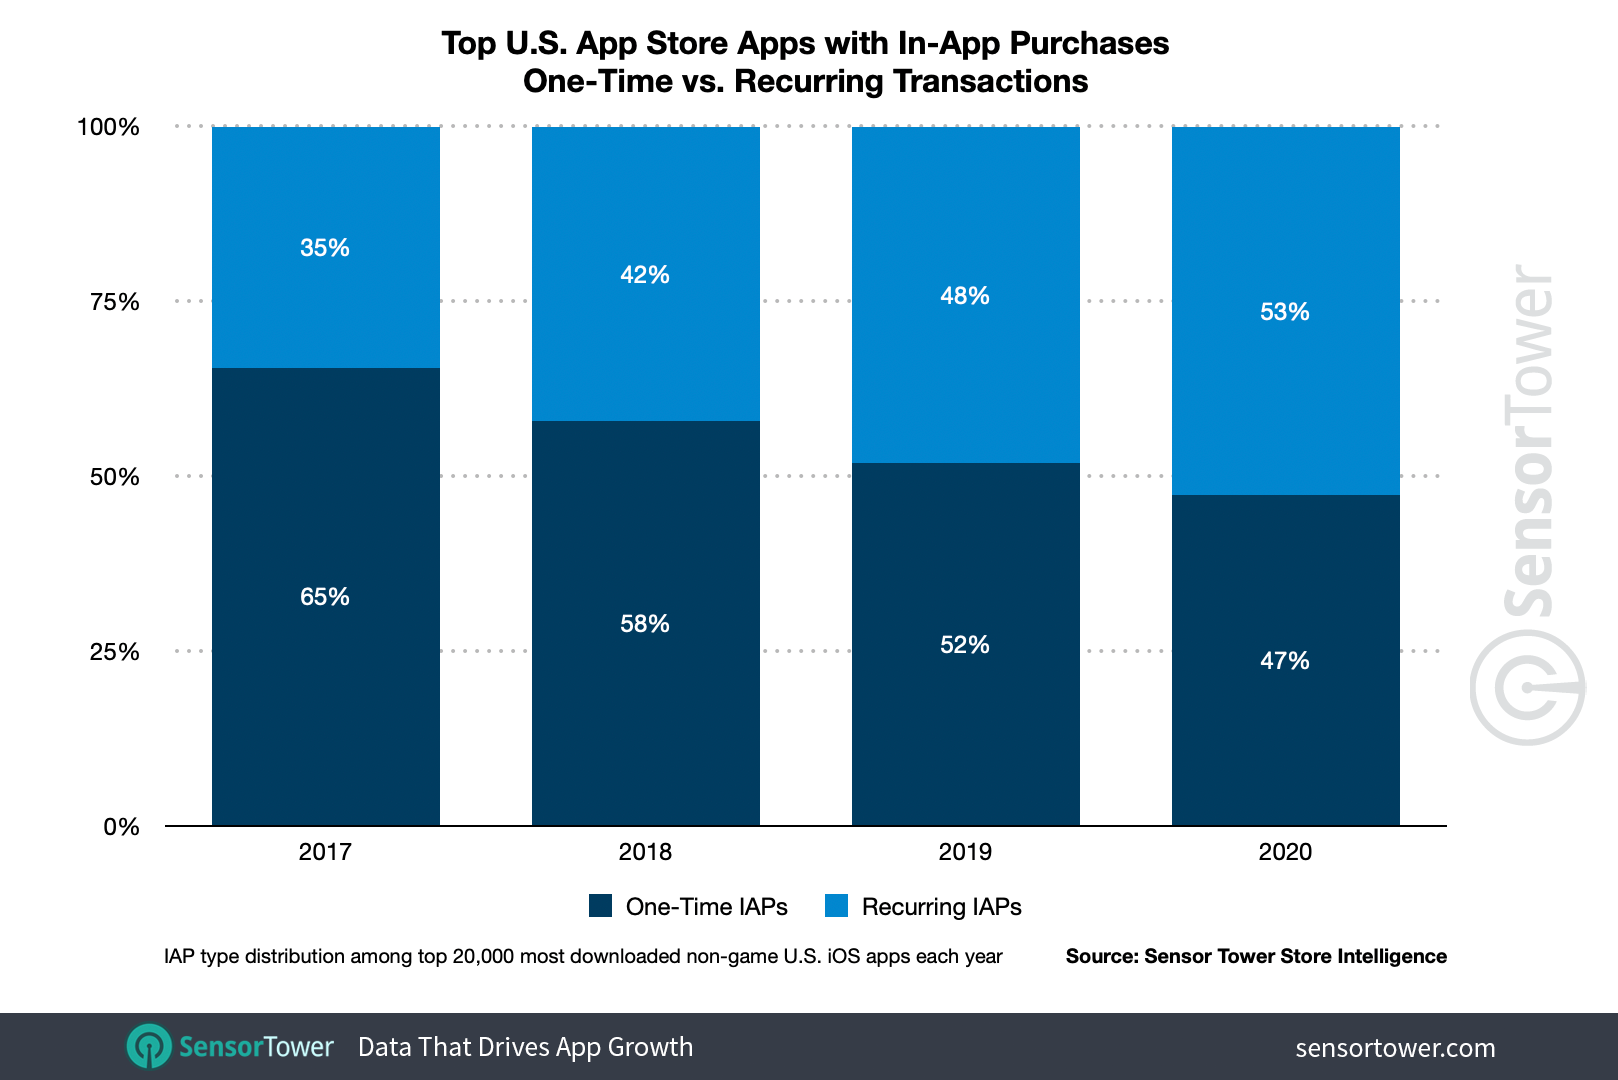 In 2020, the majority of top apps with IAPs on the U.S. App Store had an option for subscriptions